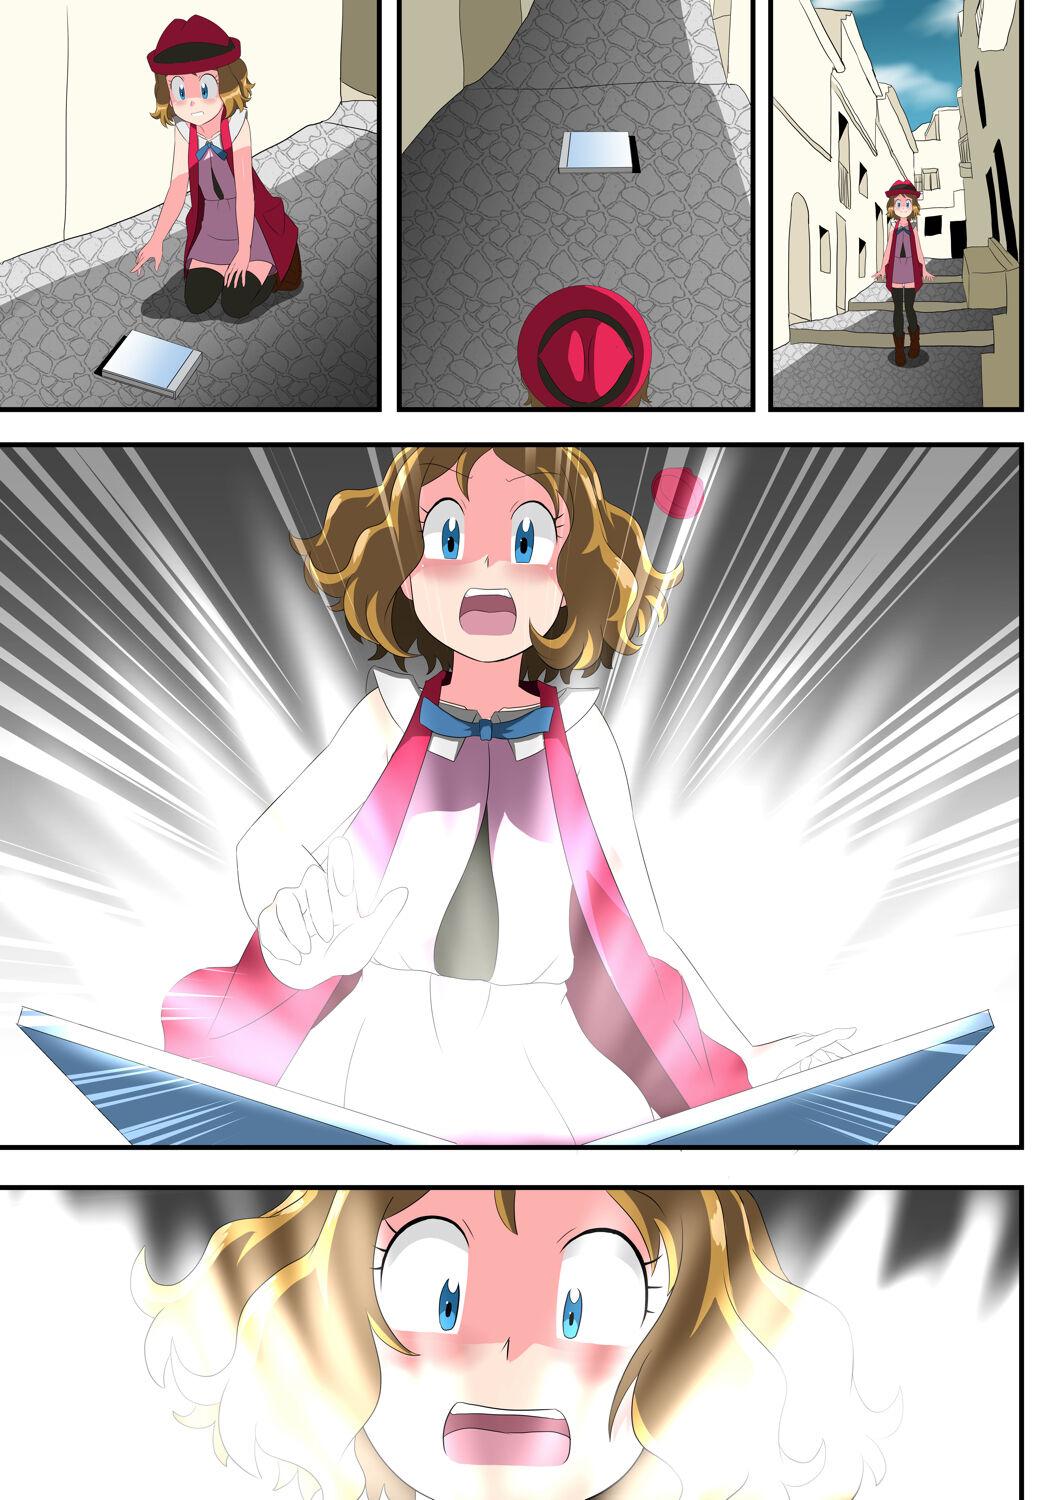 Tight Cunt shinenkan モンスターと思われて捕獲されちゃった！They thought I was a pokemon and captured me ! - Pokemon | pocket monsters Doublepenetration - Page 11